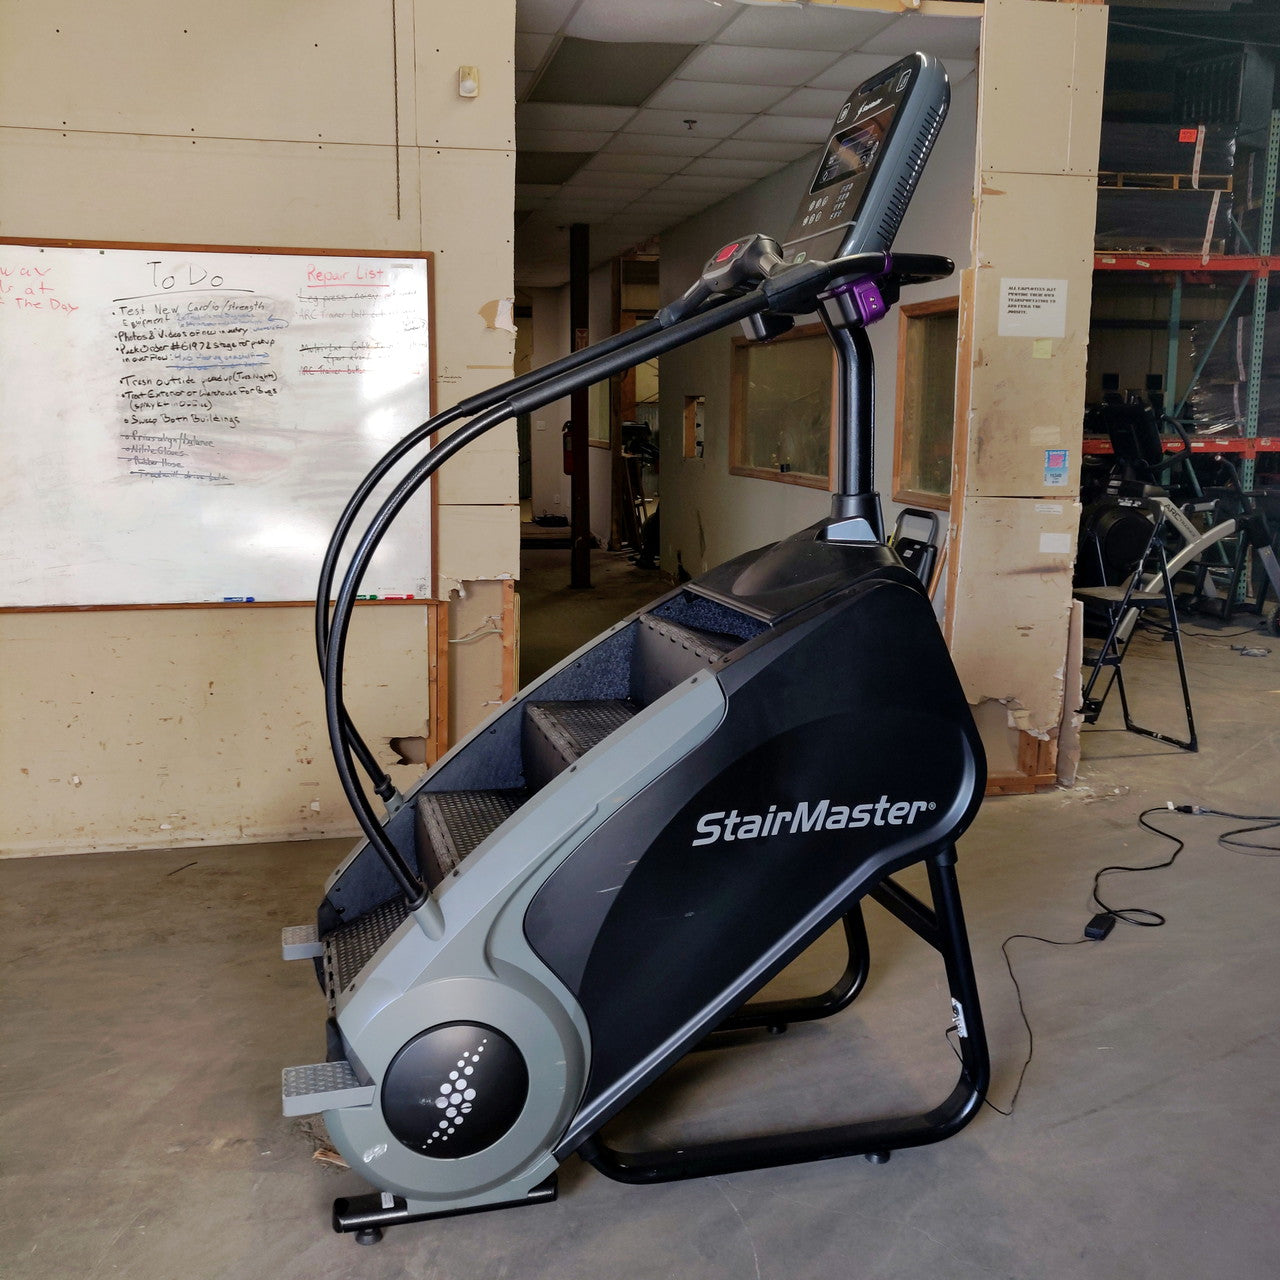 Stairmaster 8 Series Gauntlet Stairclimber Stepper Commercial Grade